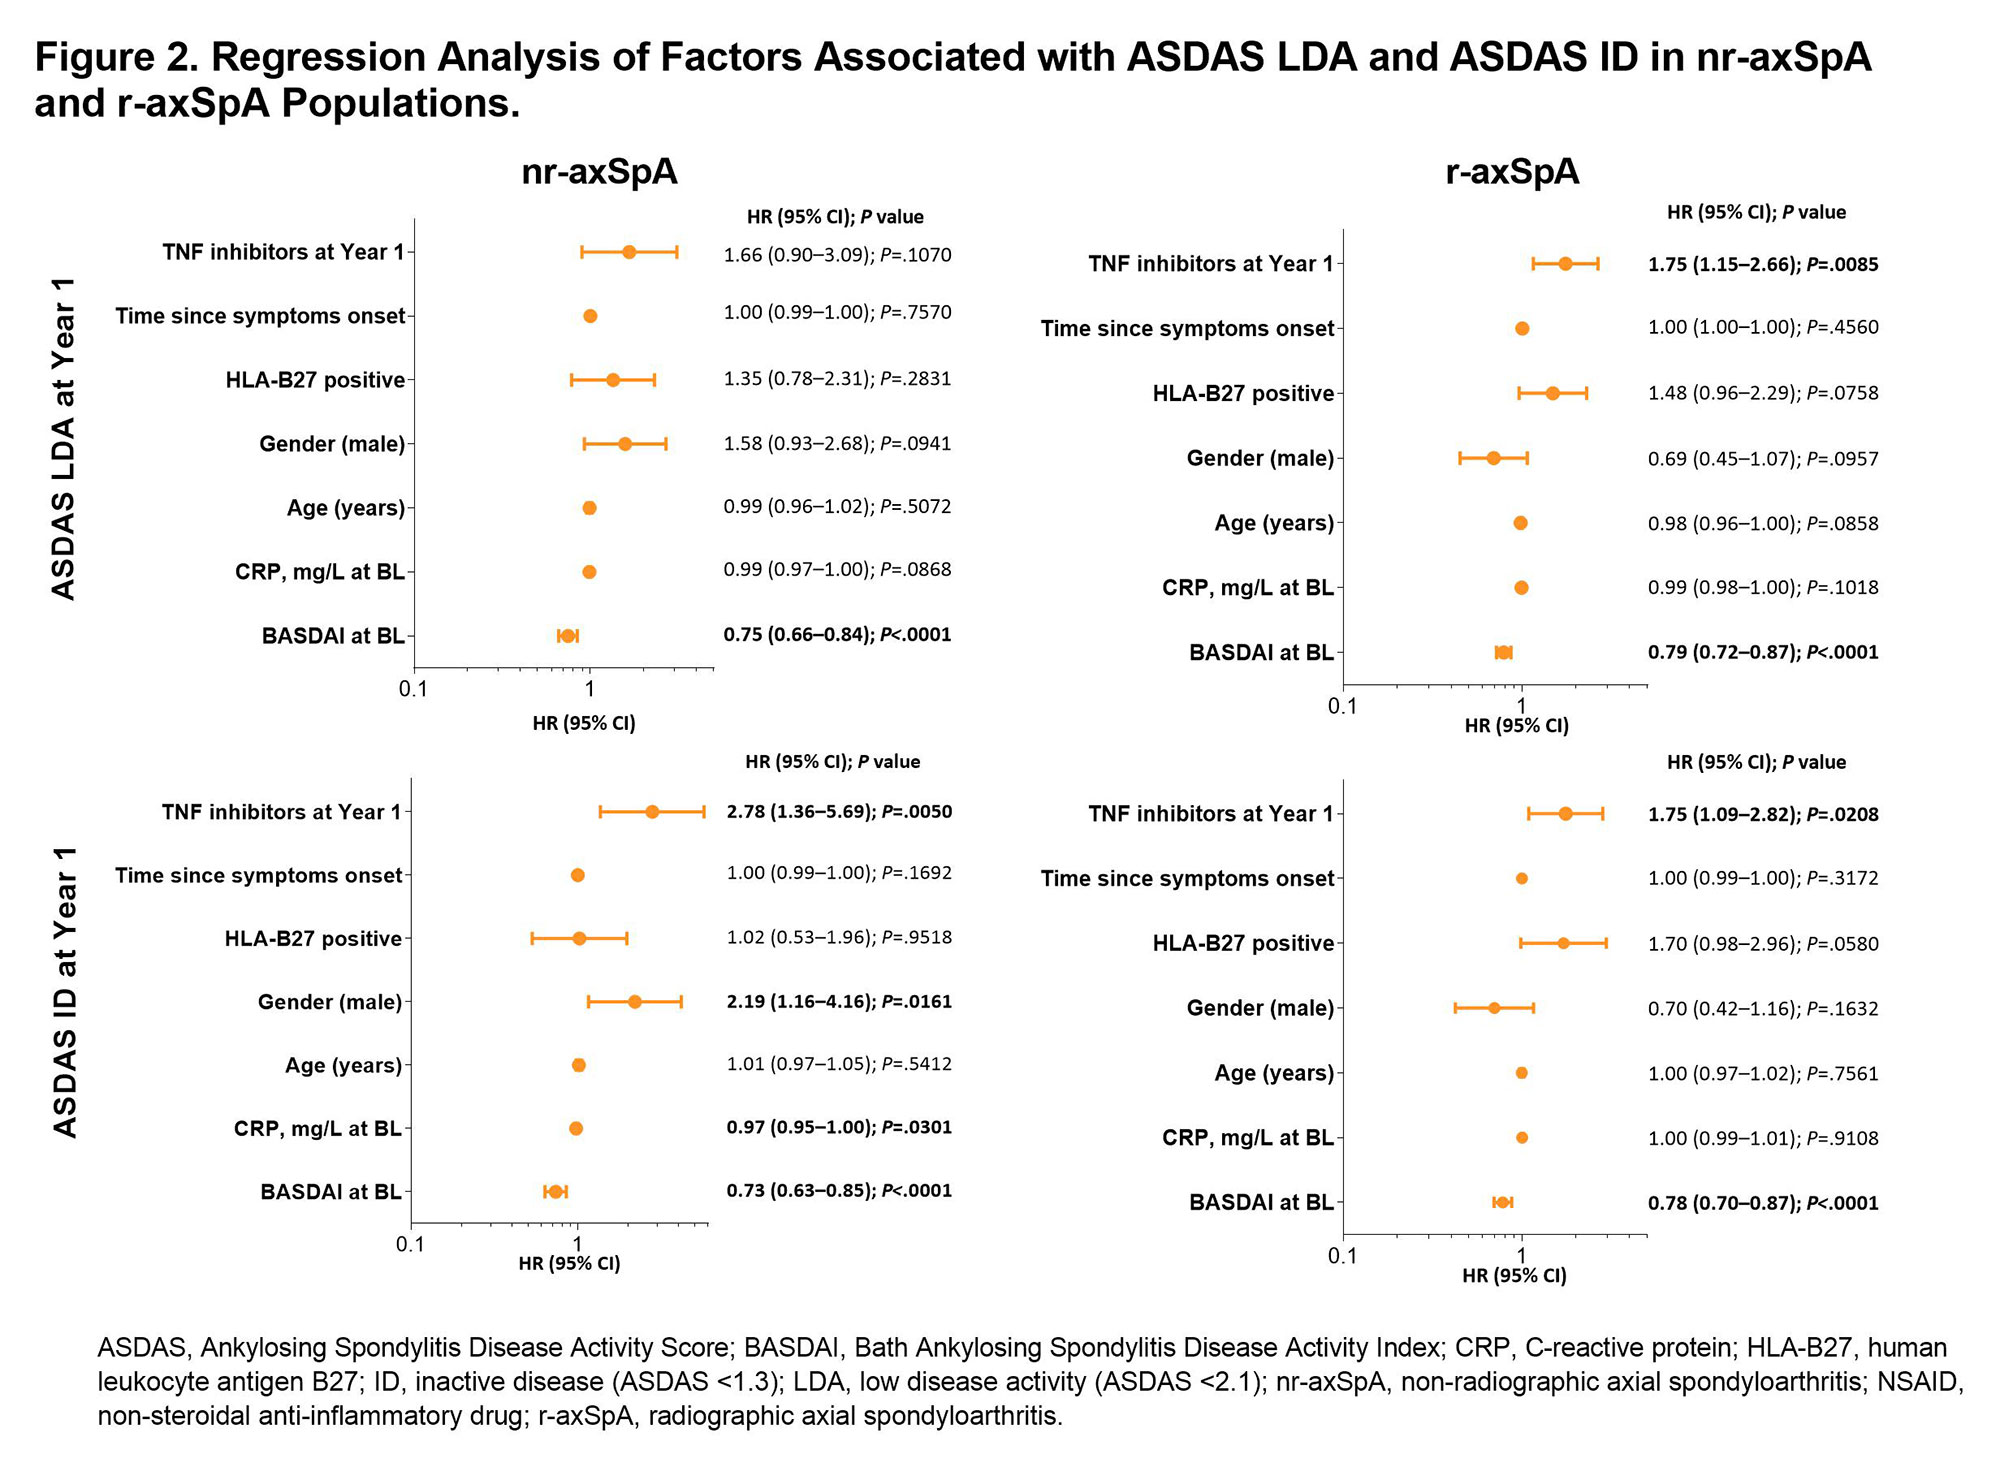 Performance of SASDAS (Simplified Axial Spondyloarthritis Disease Activity  Score) versus ASDAS in a Post Hoc Analysis of a Randomized Controlled  Clinical Trial - ACR Meeting Abstracts